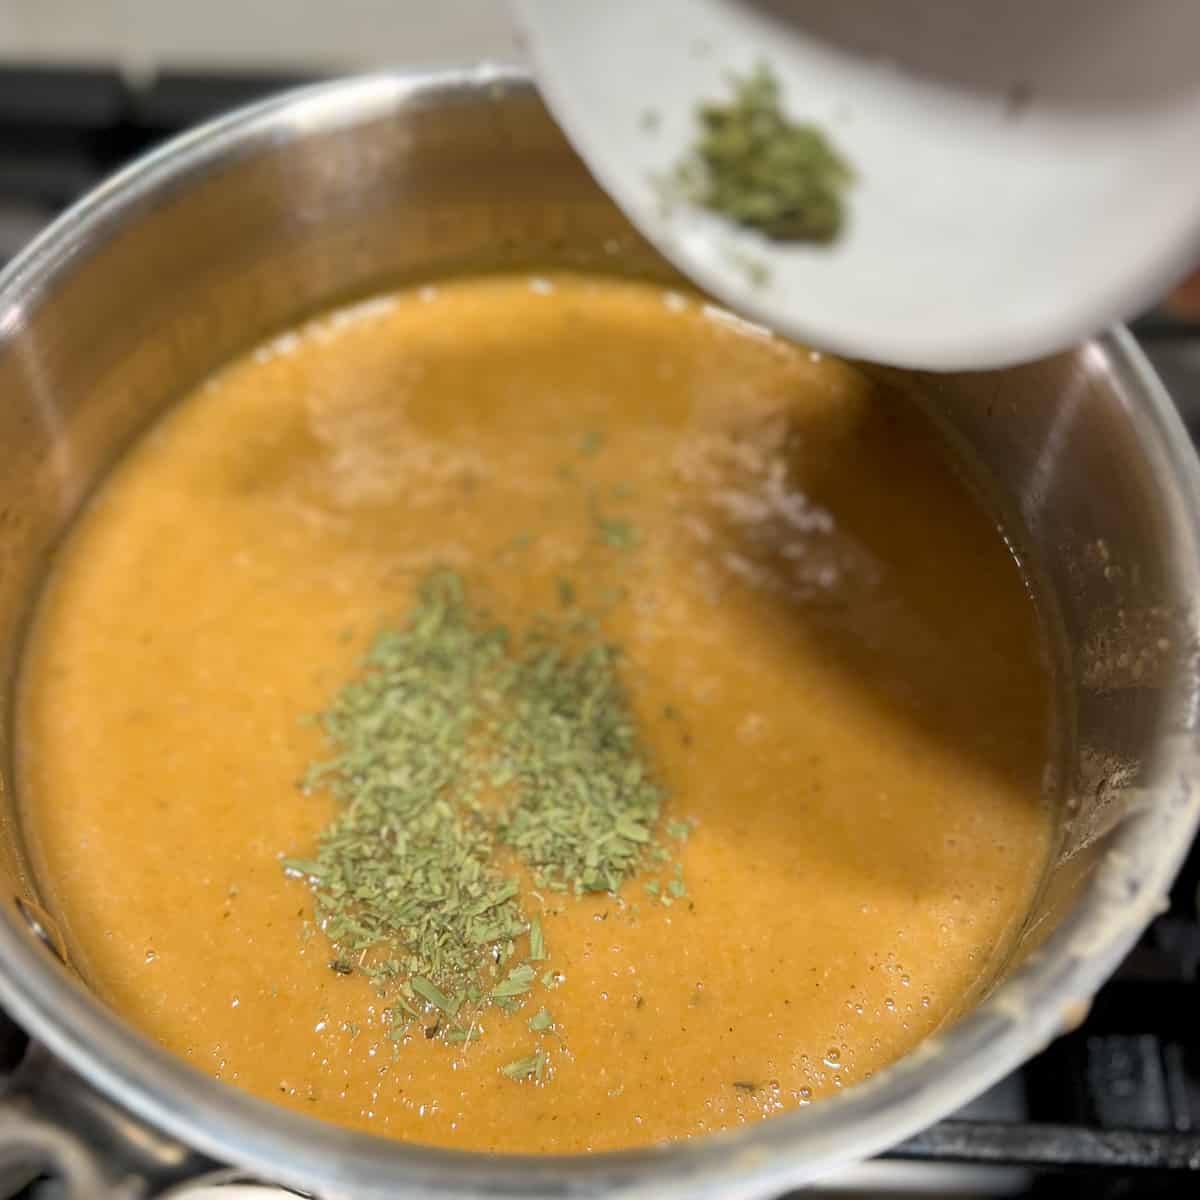 top side view of dried tarragon being added to the soup mixture in the pot on the stovetop